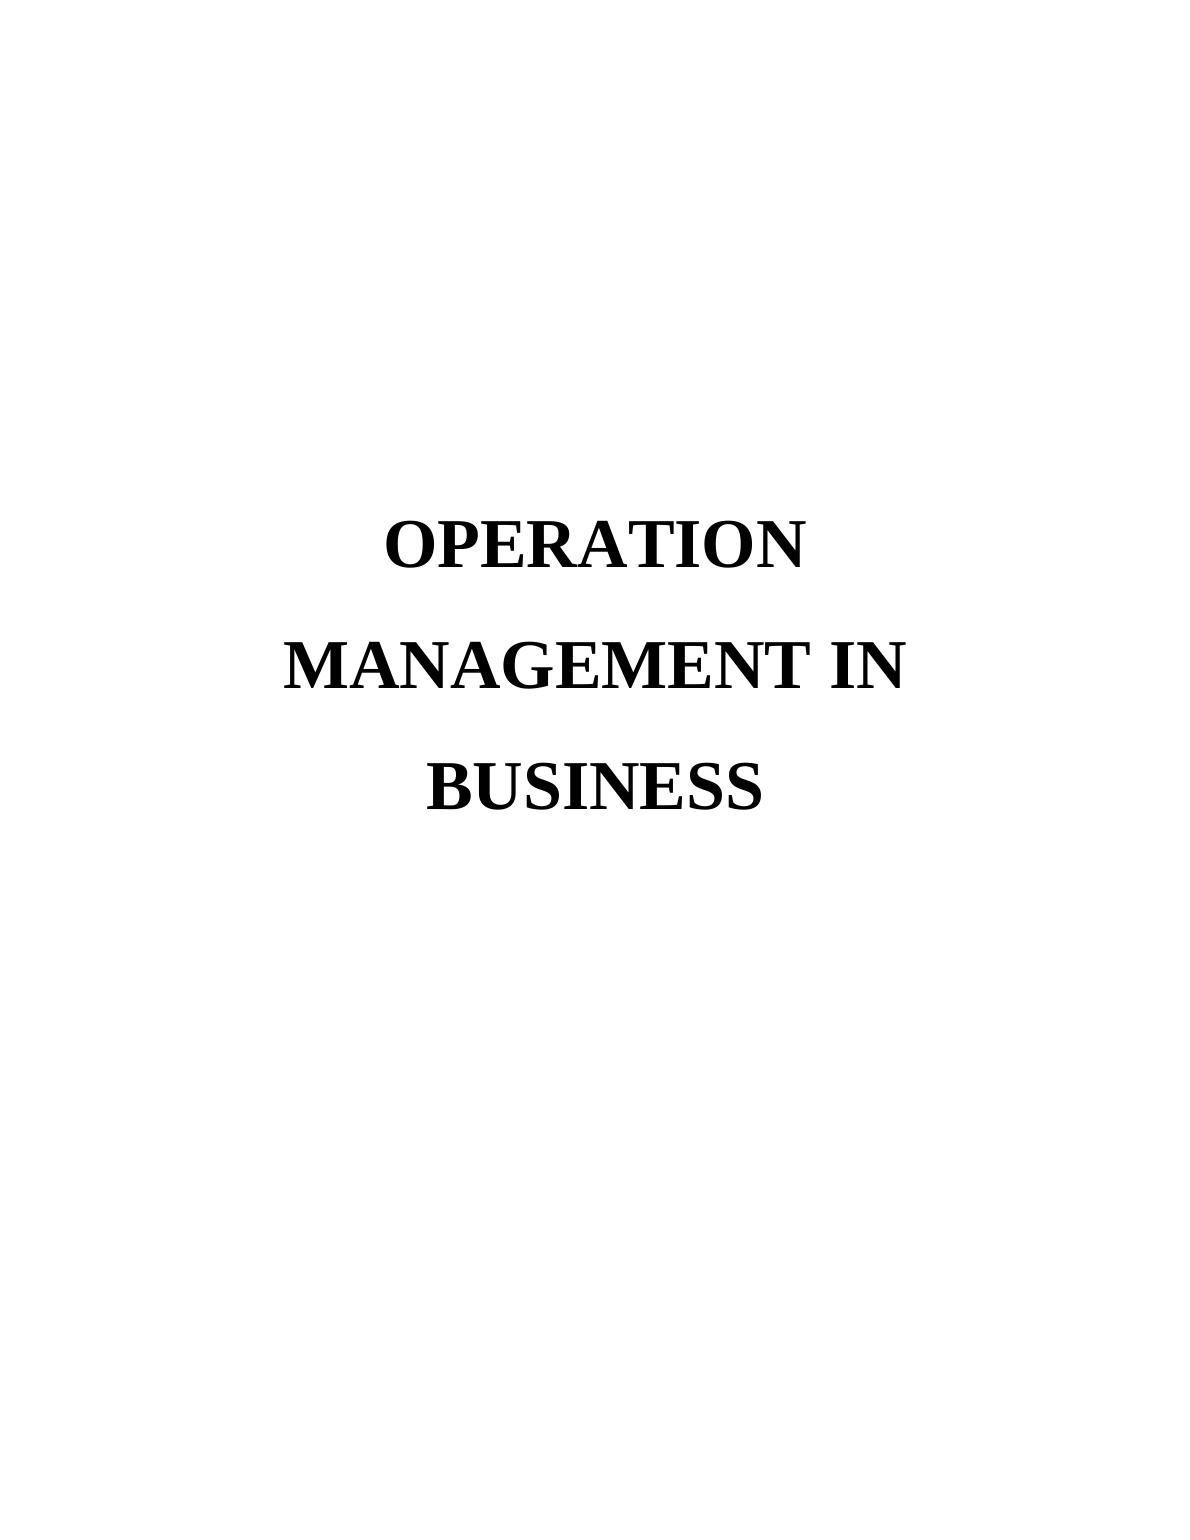 Operation Management in Business : Assignment_1